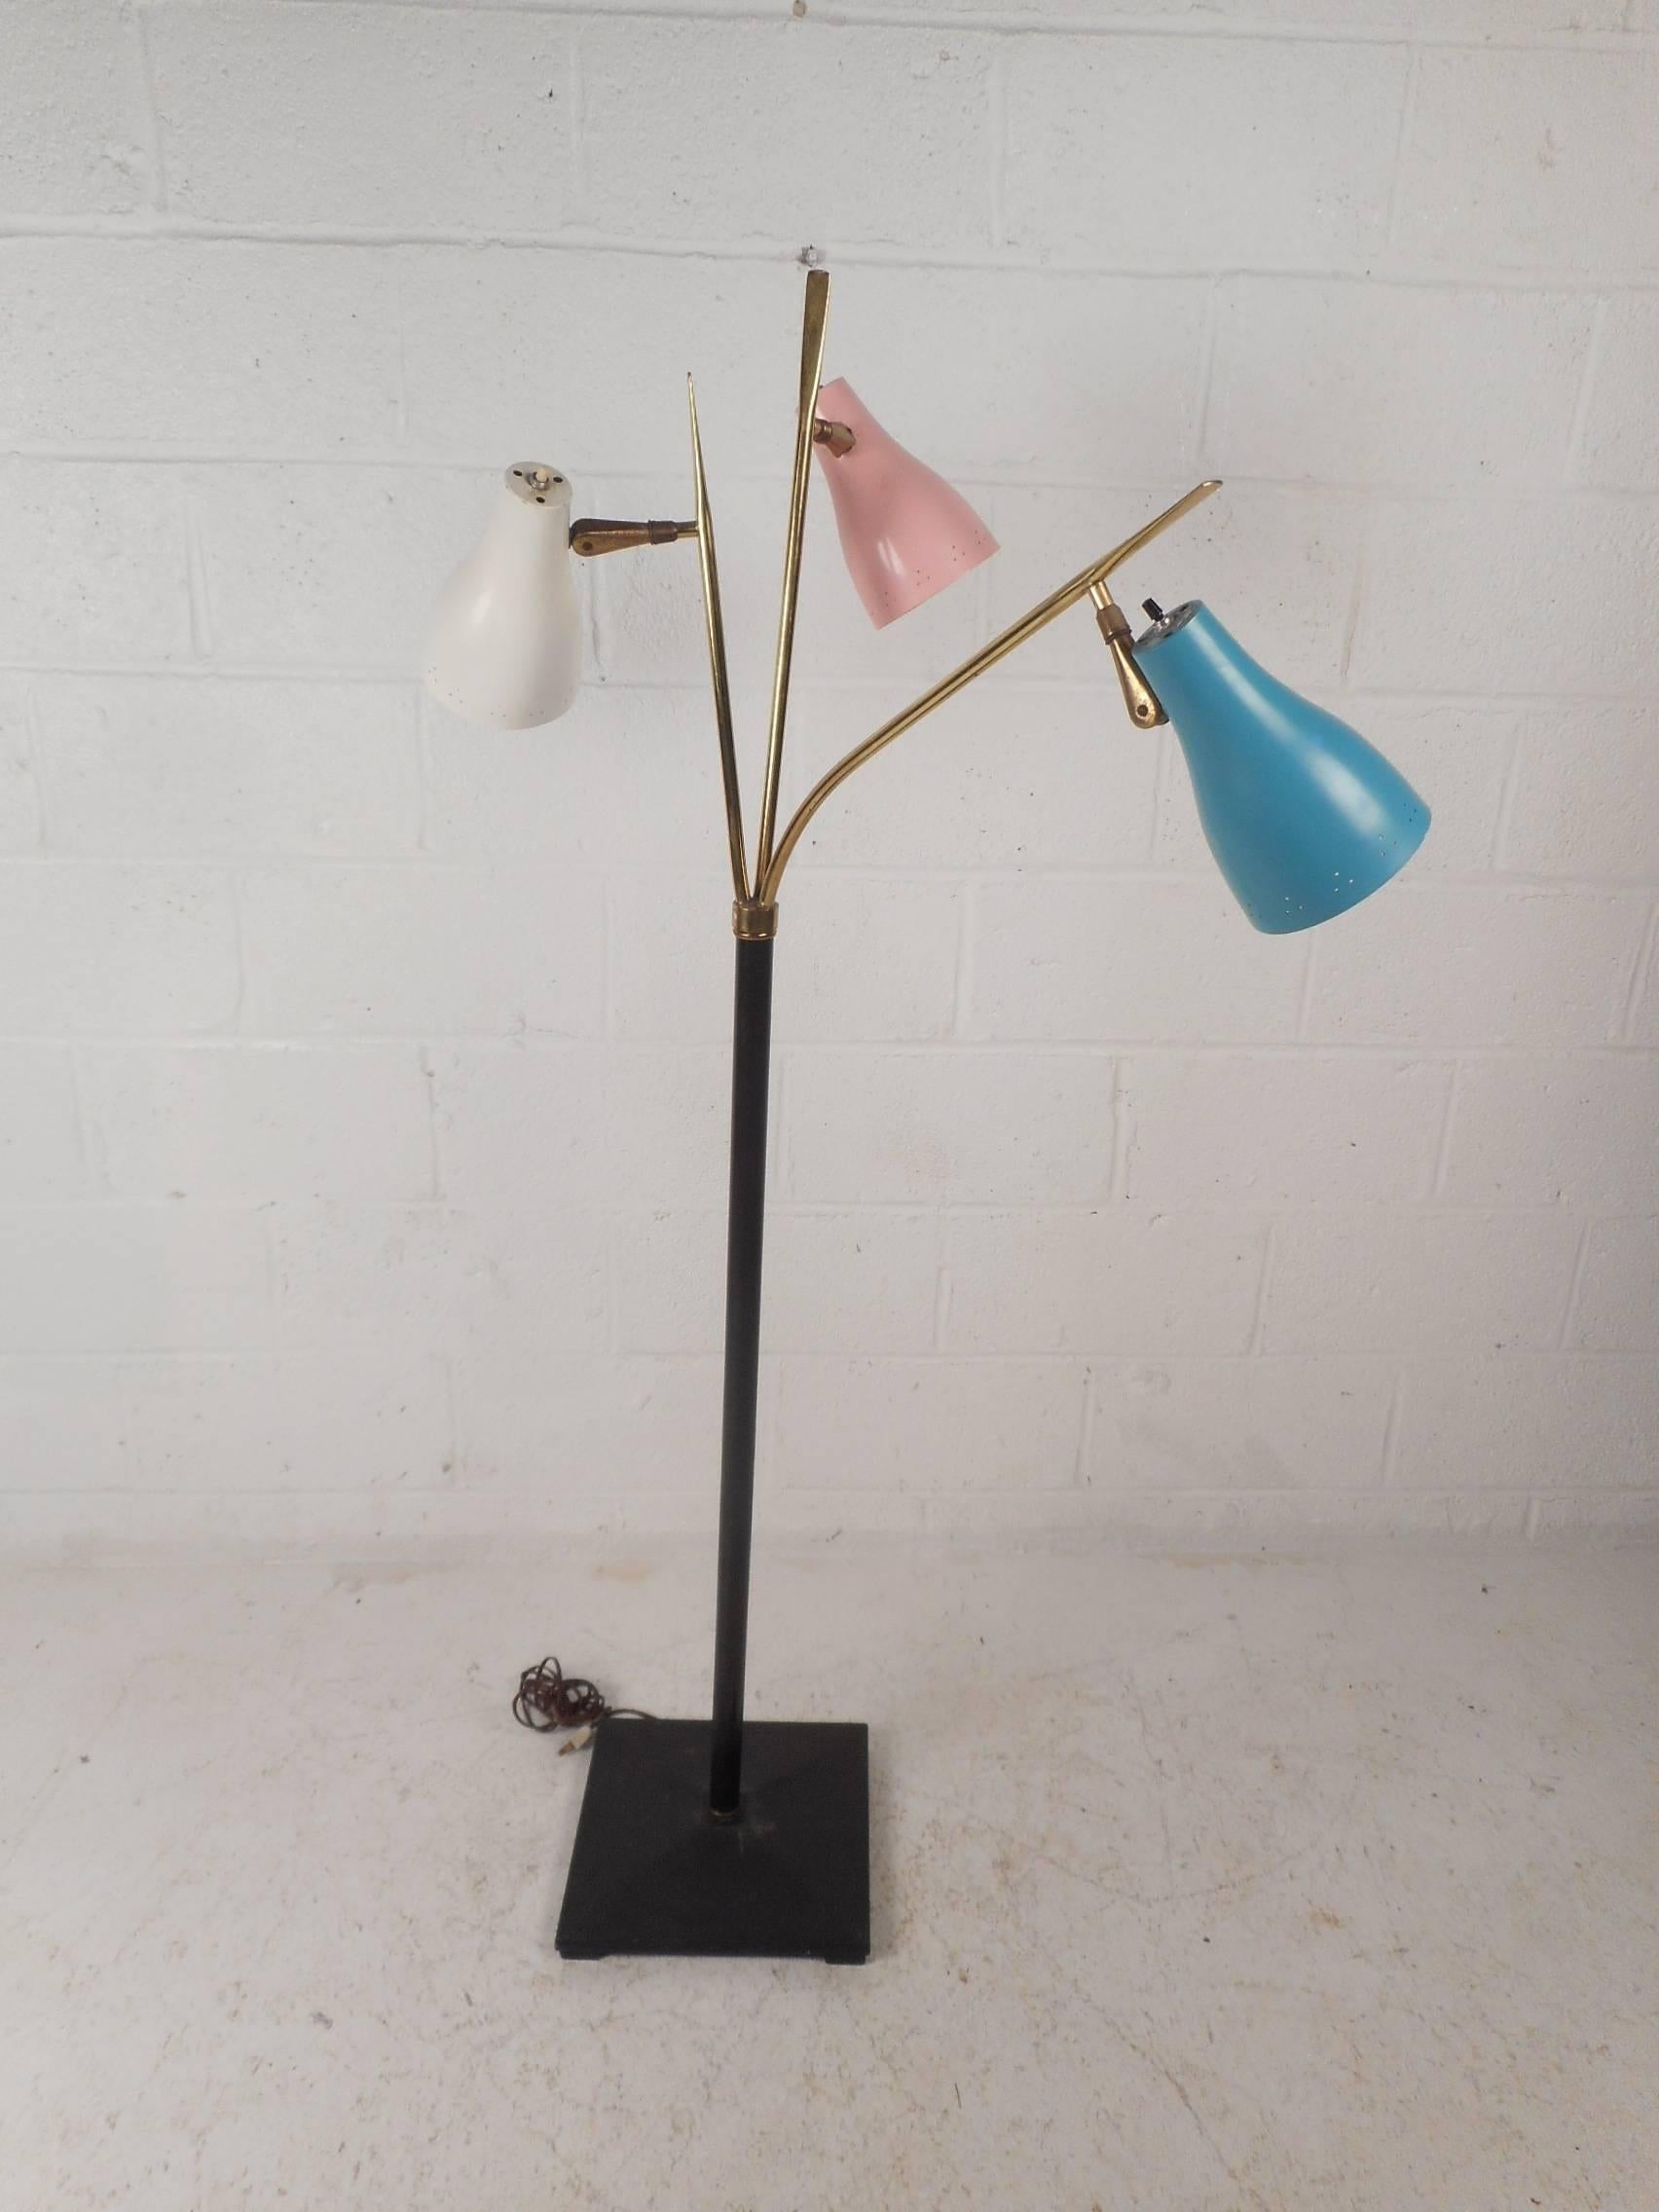 This beautiful vintage modern floor lamp features three various colored adjustable lamp heads. Sleek design has the ability to swivel without moving the base with the three pronged brass top. This elegant Mid-Century piece is sure to add style and